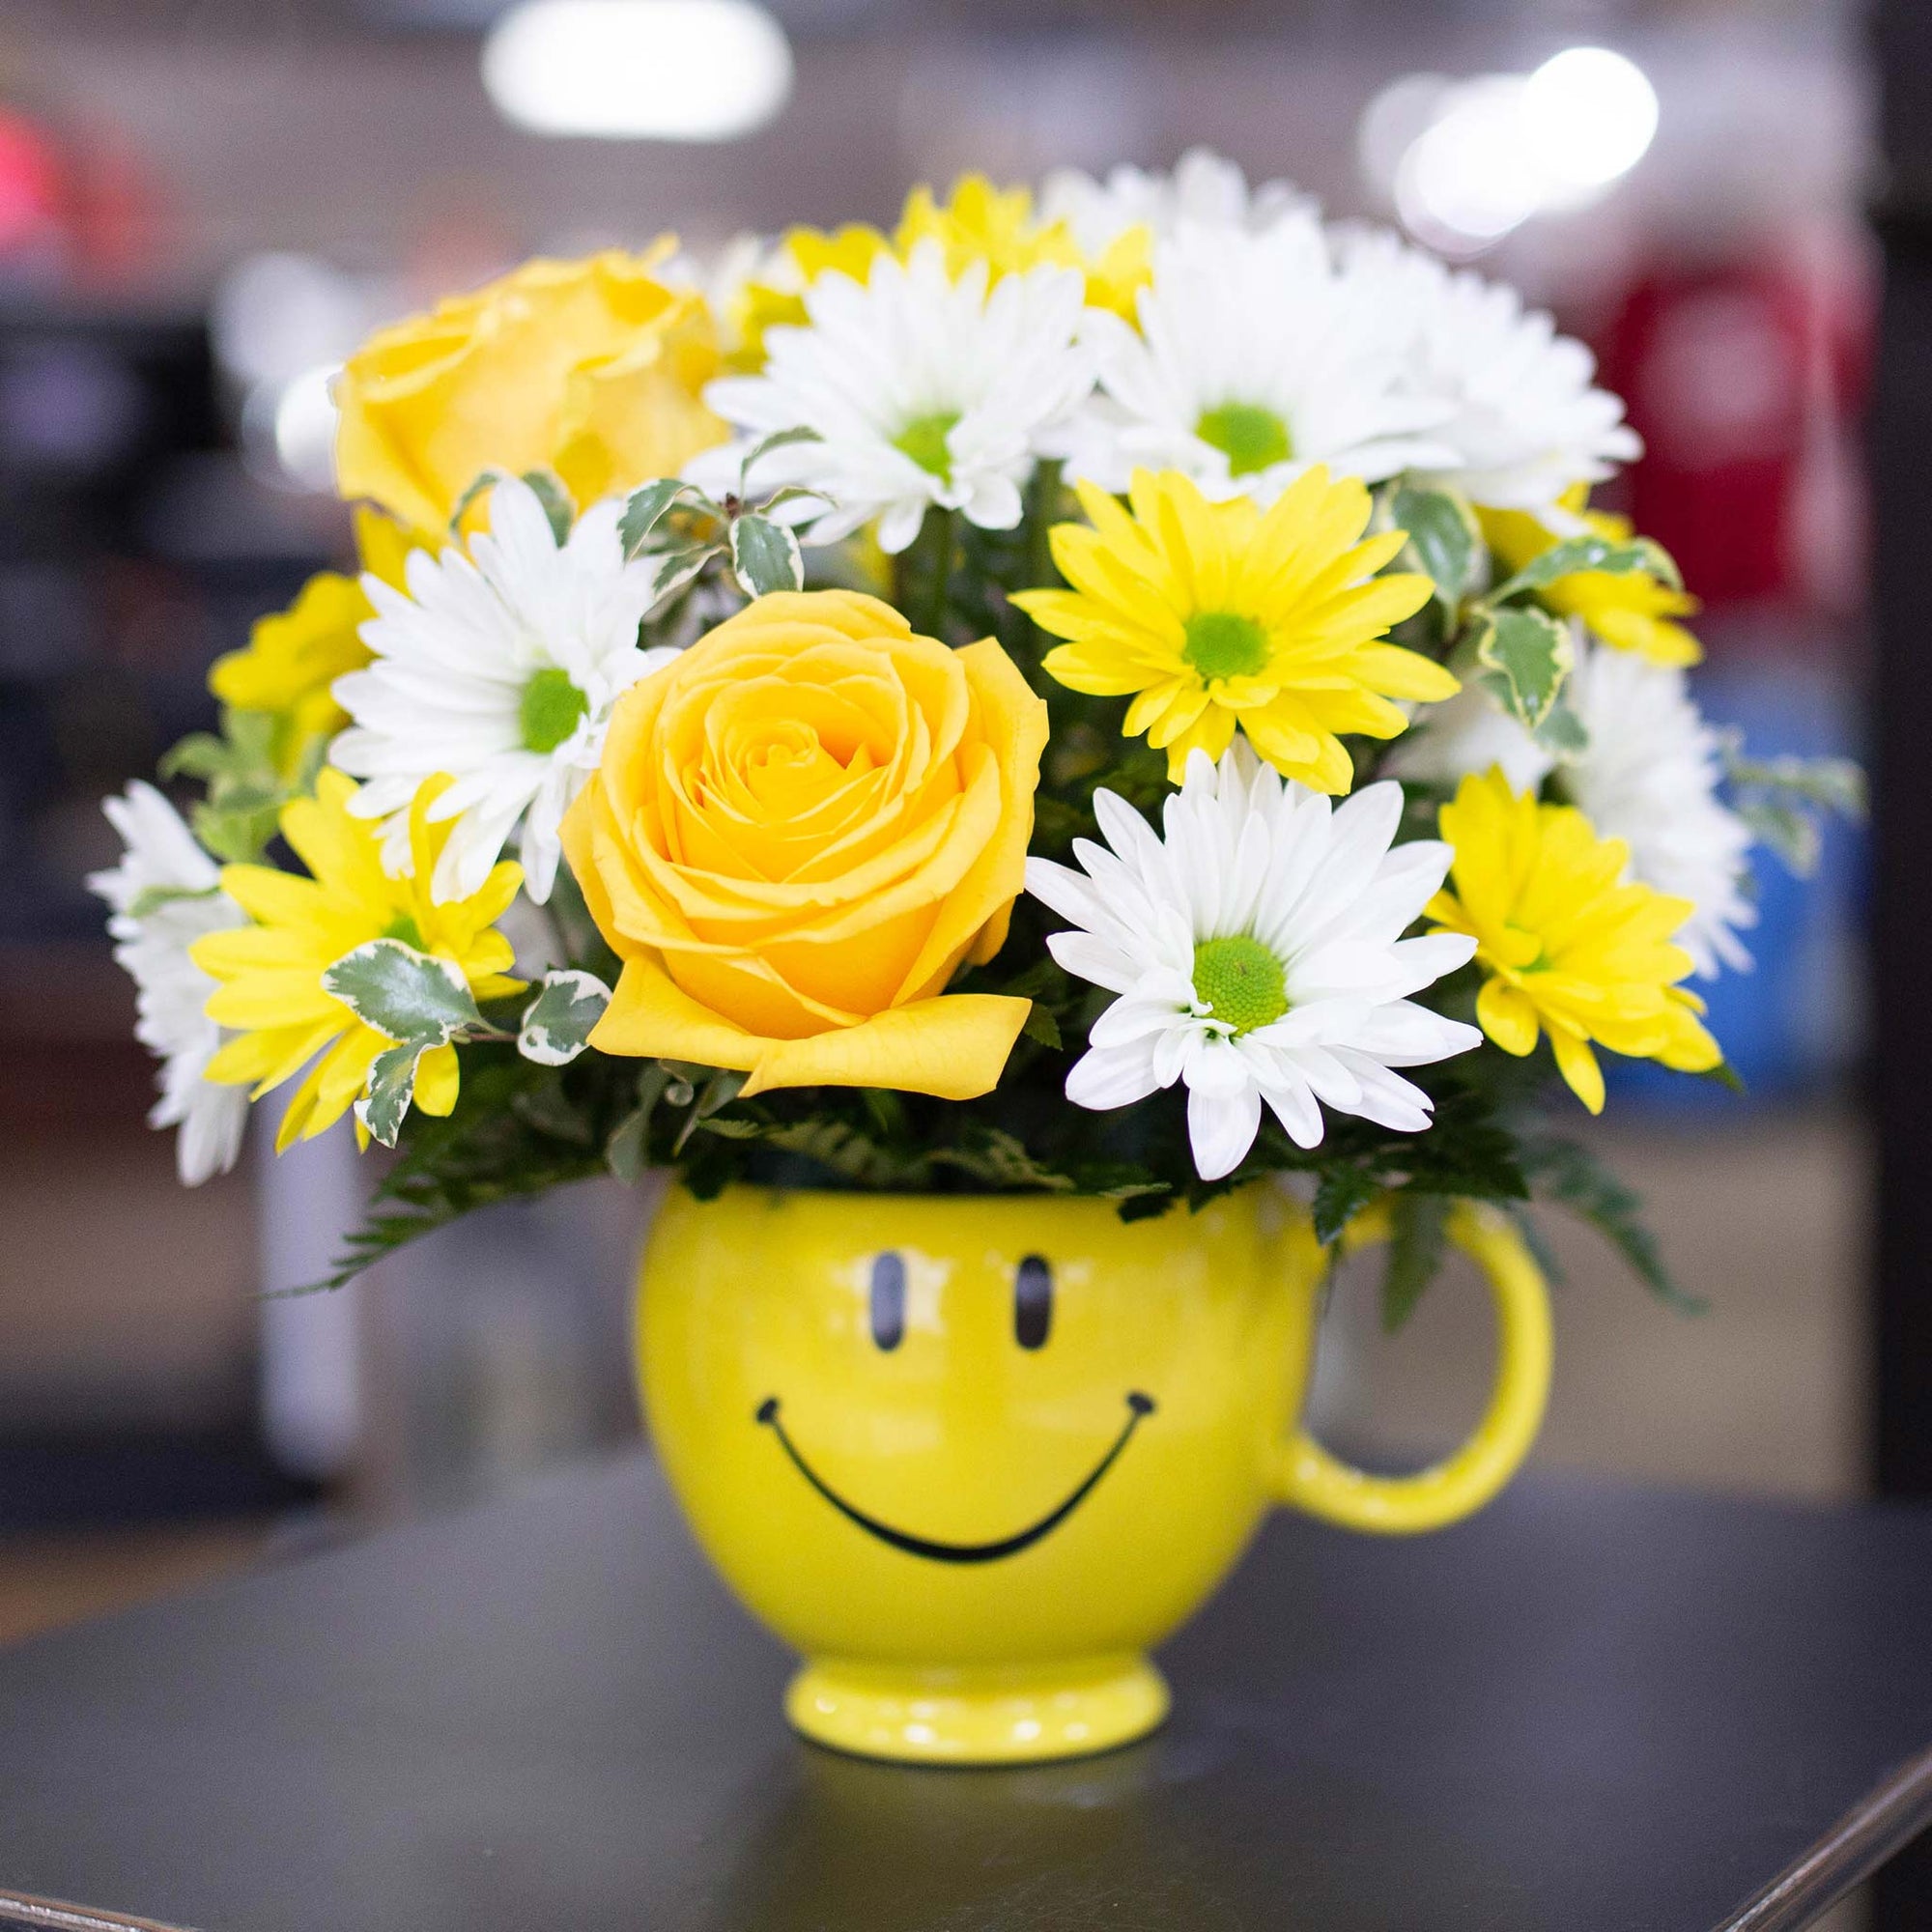 Yellow and white flowers in a smiley face mug